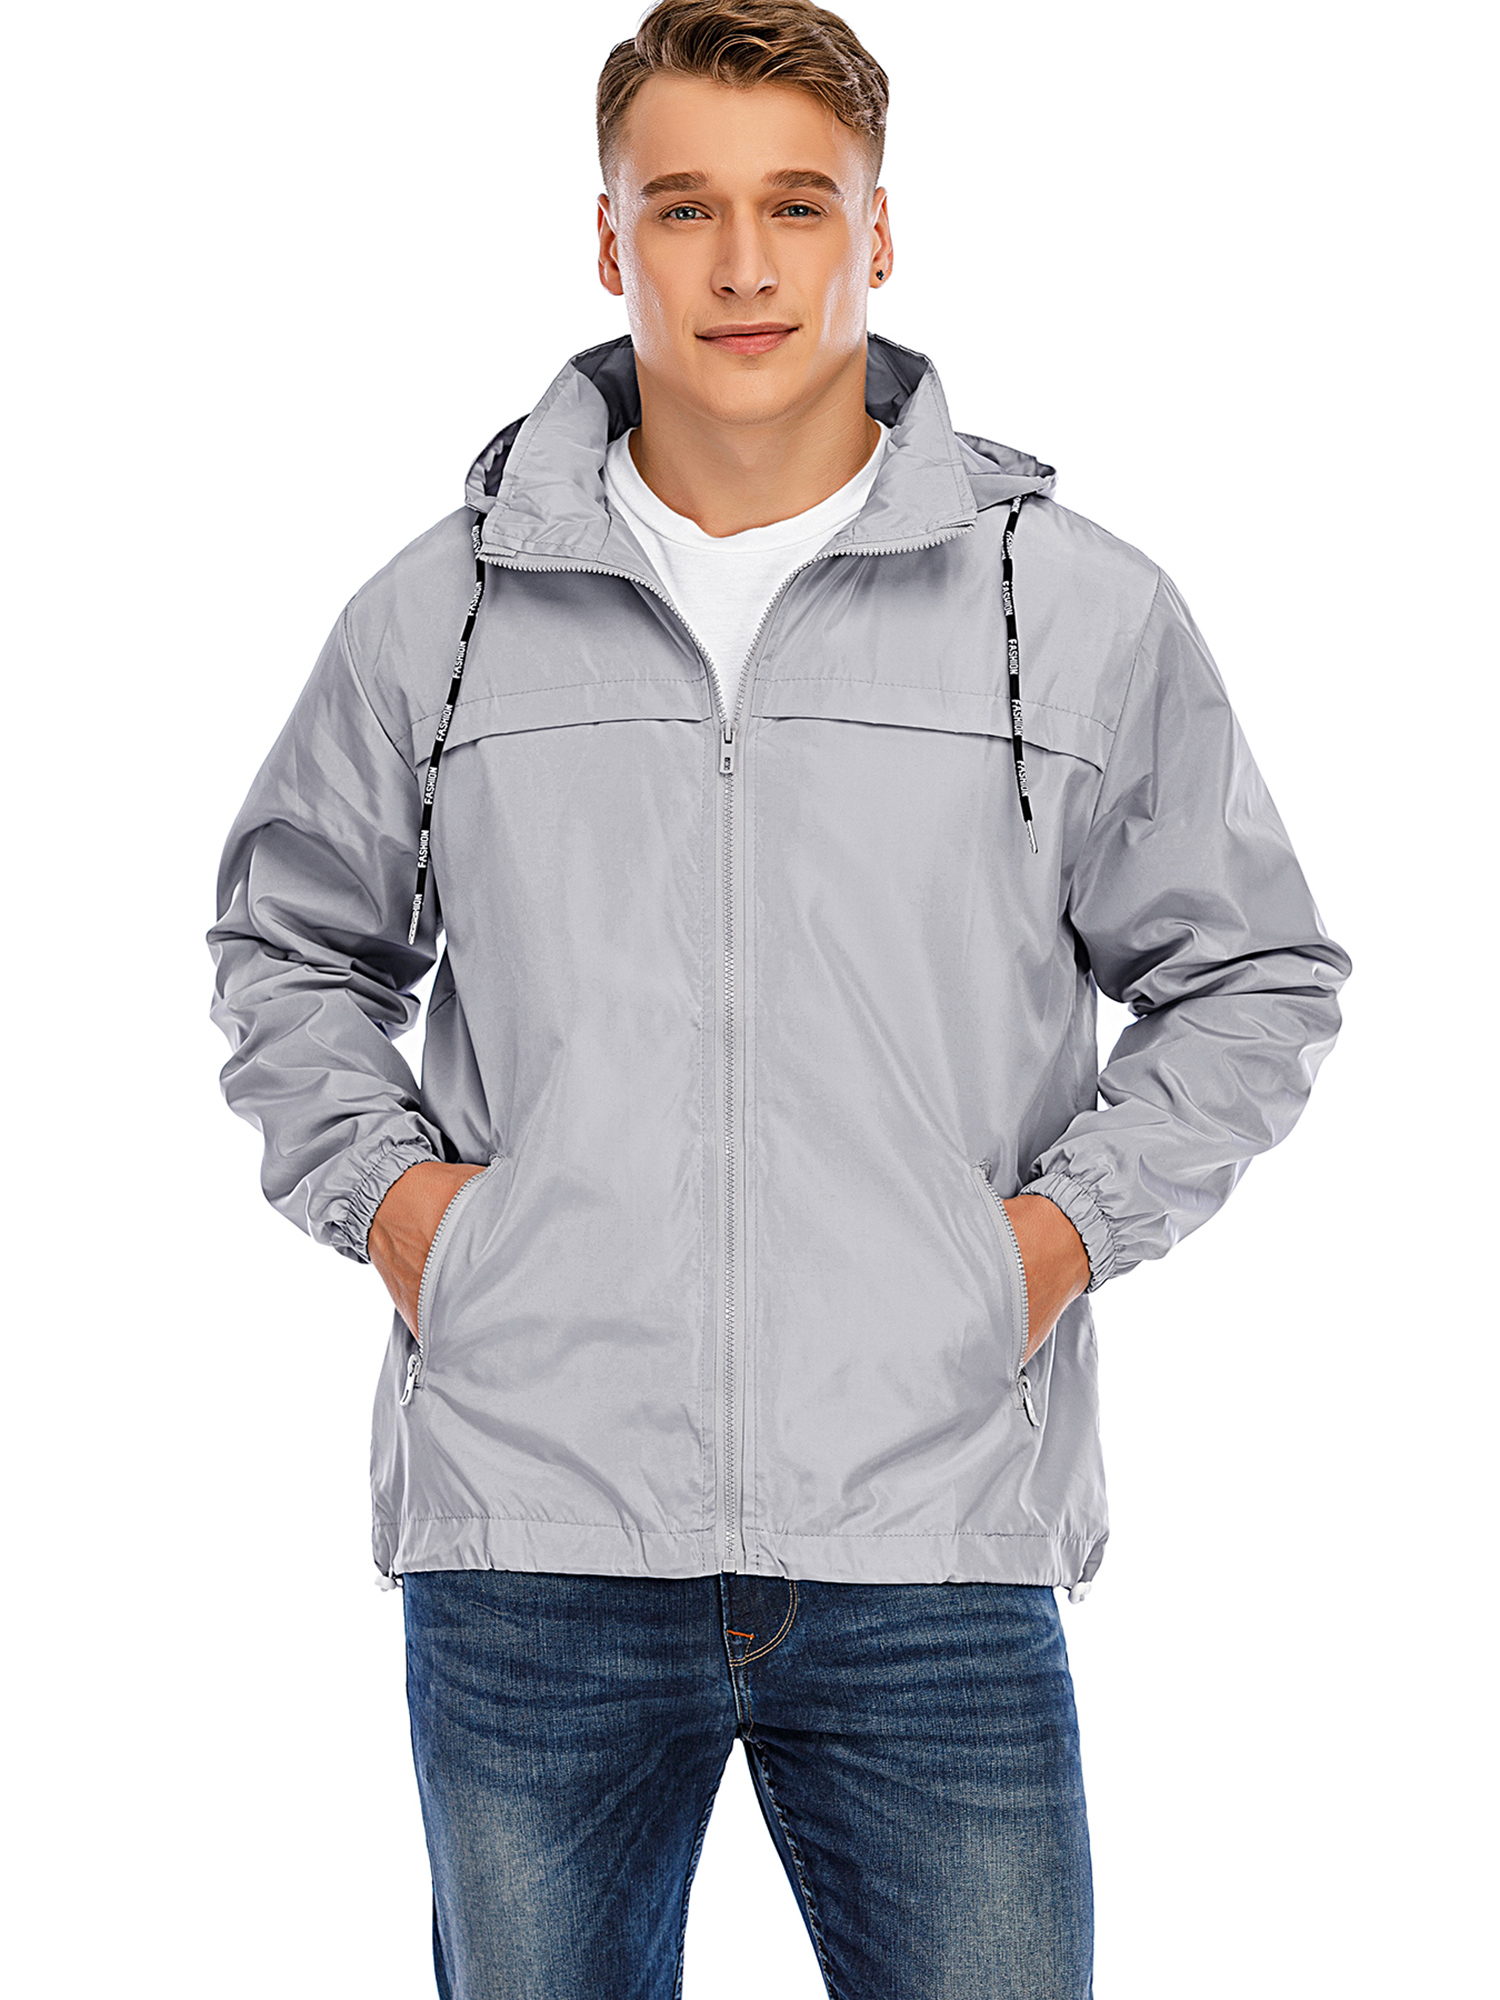 Men Hooded Waterproof Outdoor Jacket Lightweight Rain Jacket Windproof Water Resistant Jacket for Hiking Casual Work, Big & Tall up to Size 3XL - image 1 of 8